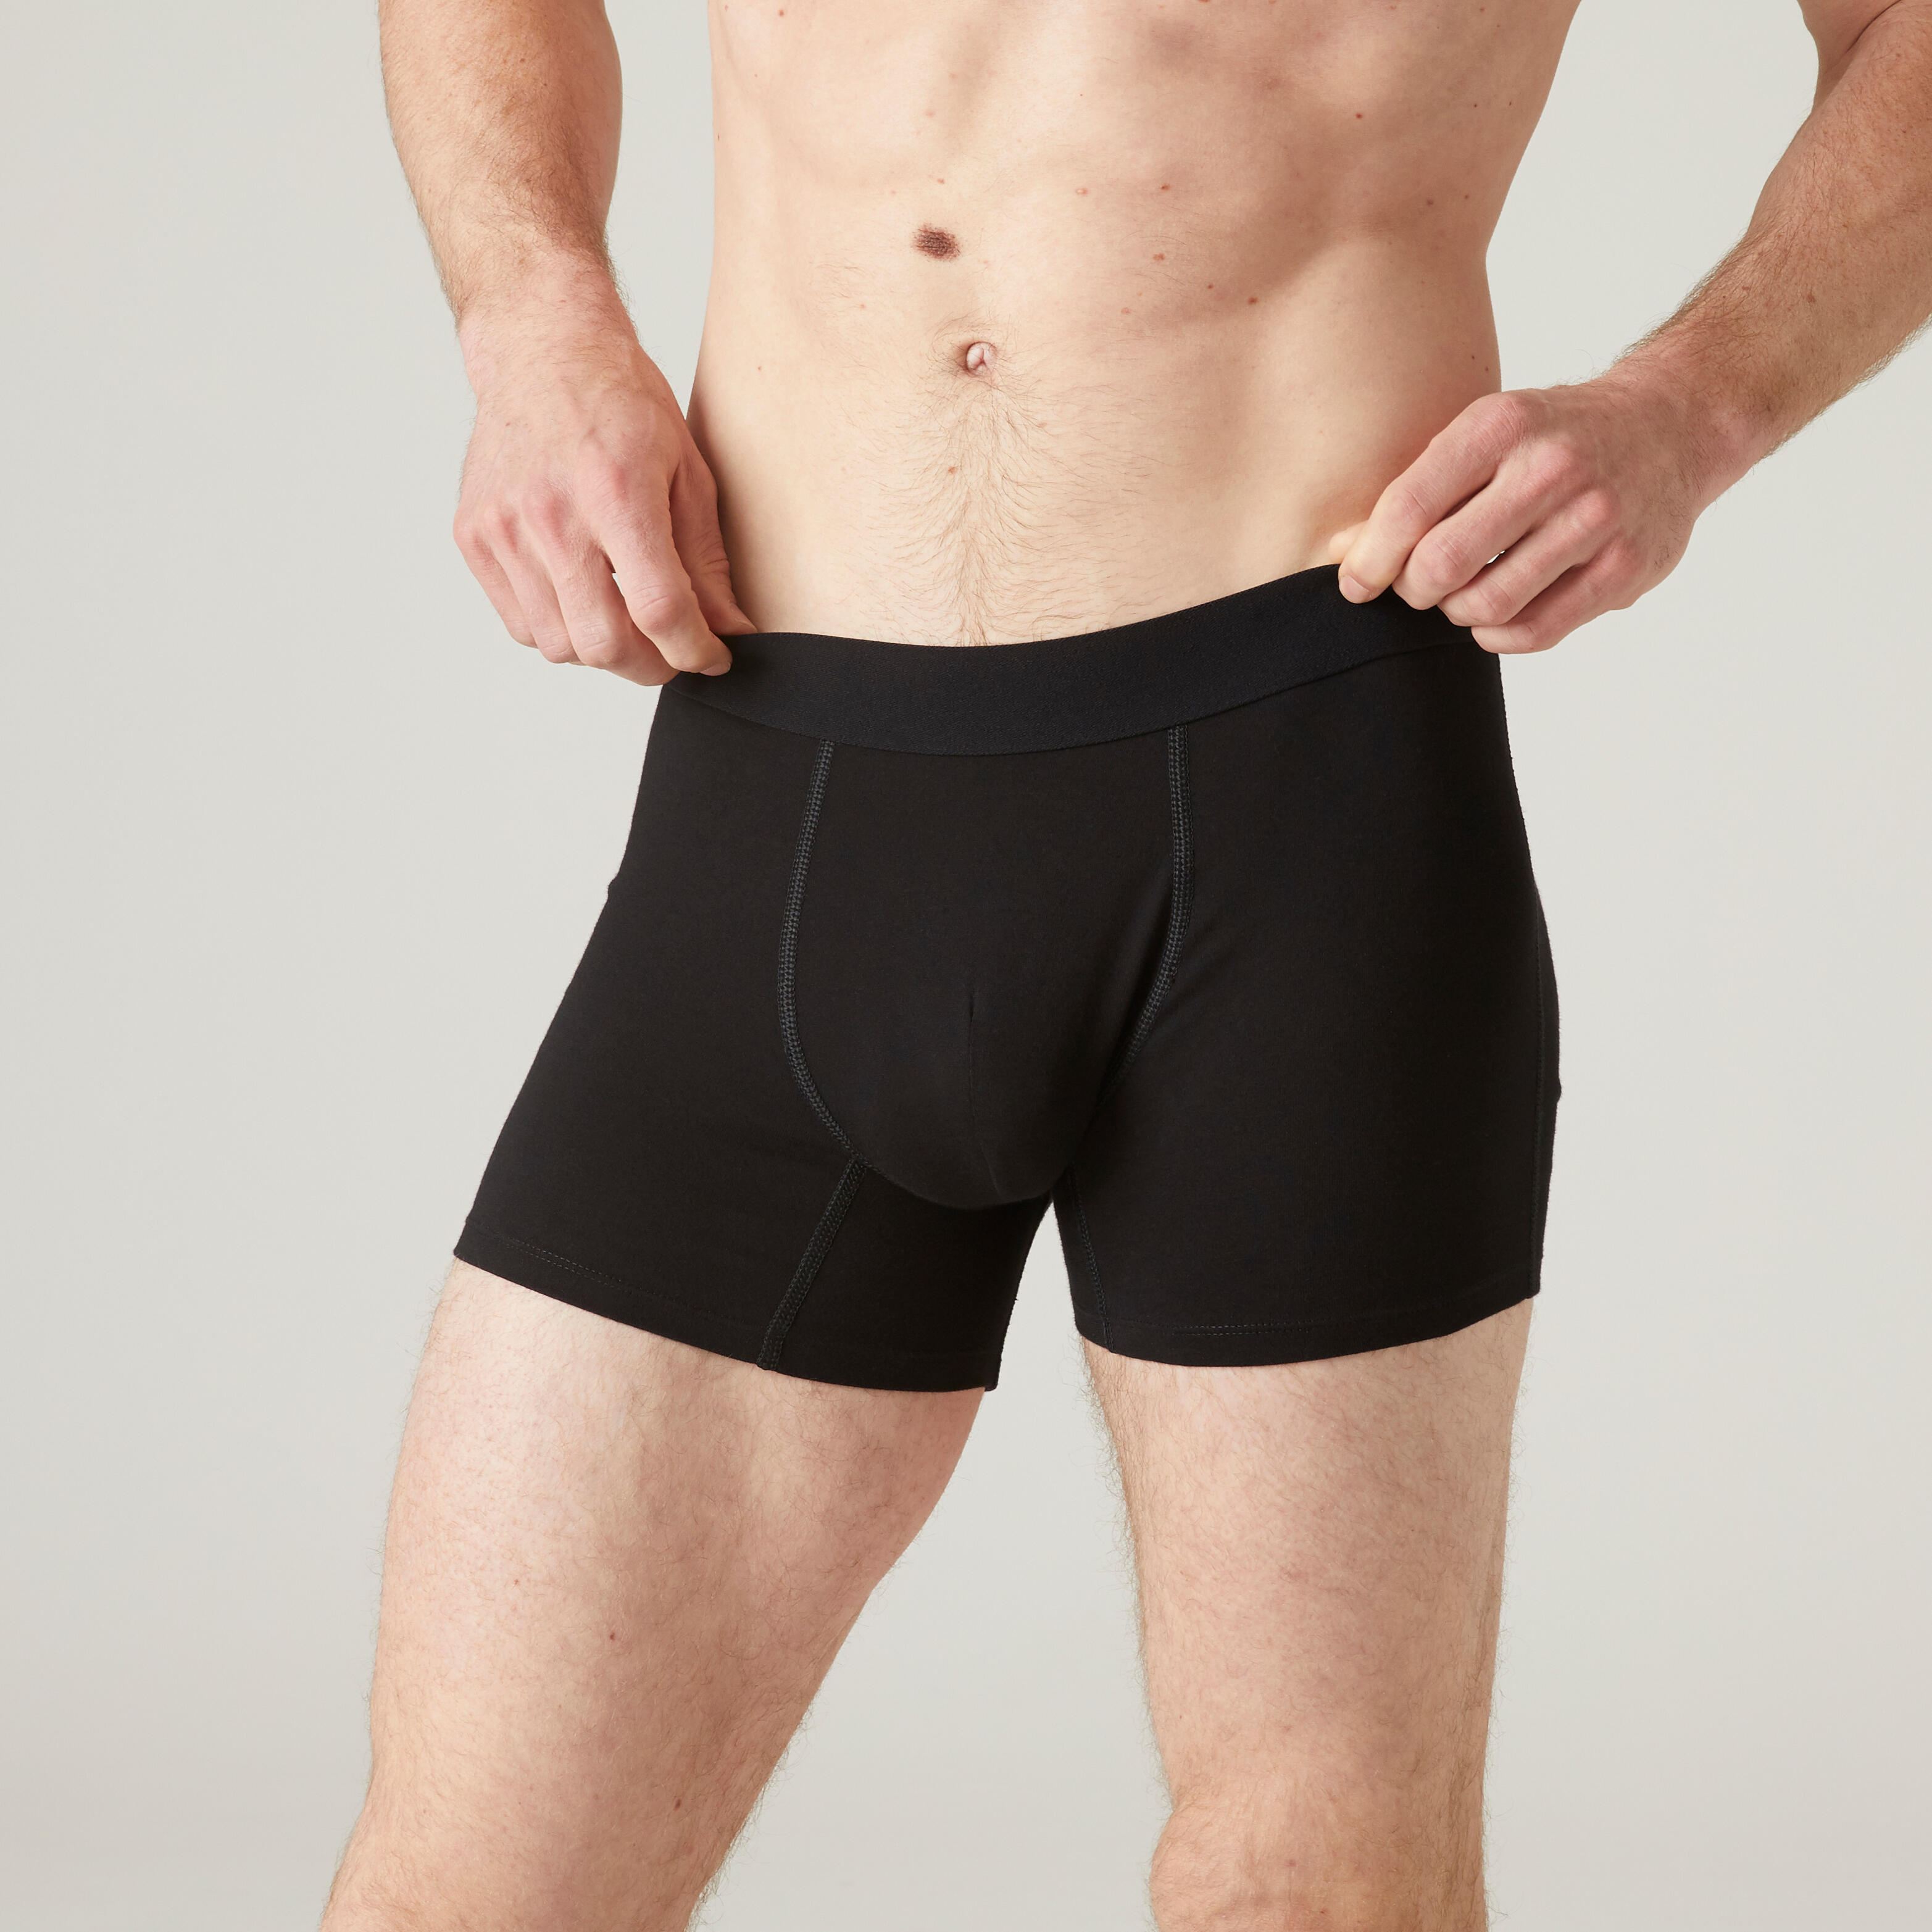 Boxers for Men Boxer shorts for men for comfortable lounging at home    Times of India